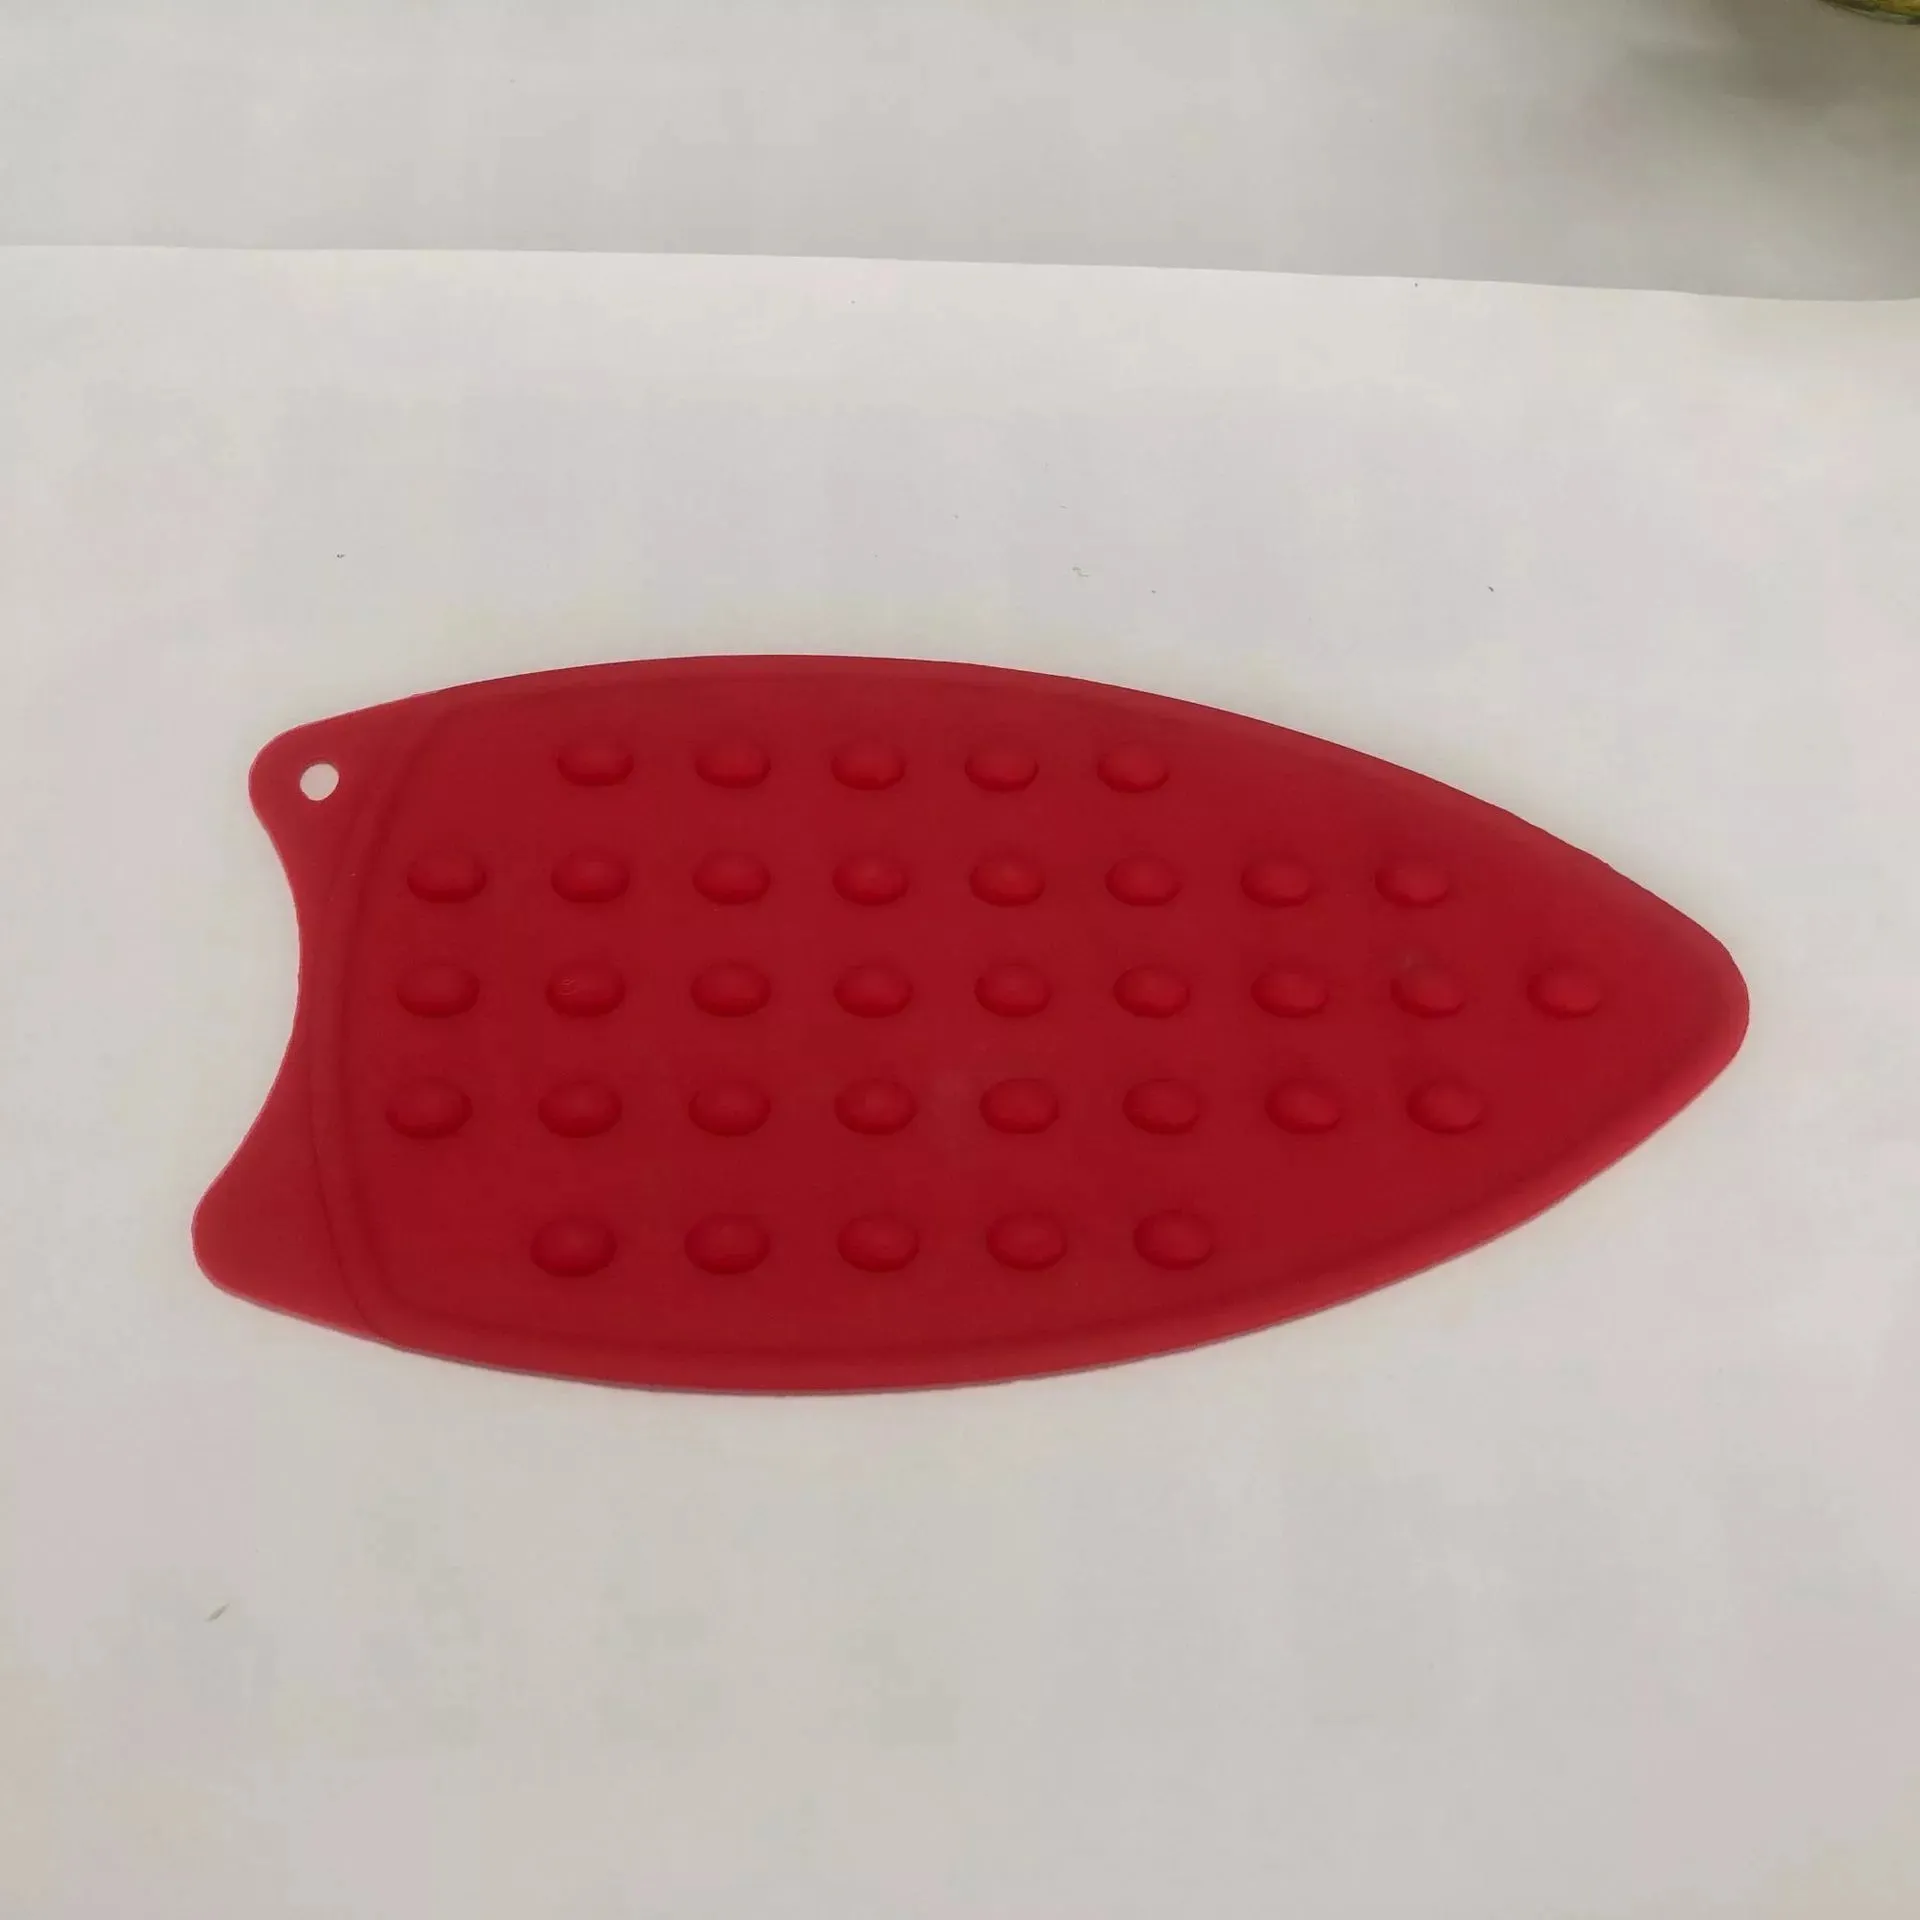 Hot Sale Multipurpose Silicone Iron Rest Pad for Ironing Board Hot Resistant Mat,Silicone Heat Resistant Iron Pad iron mat pad